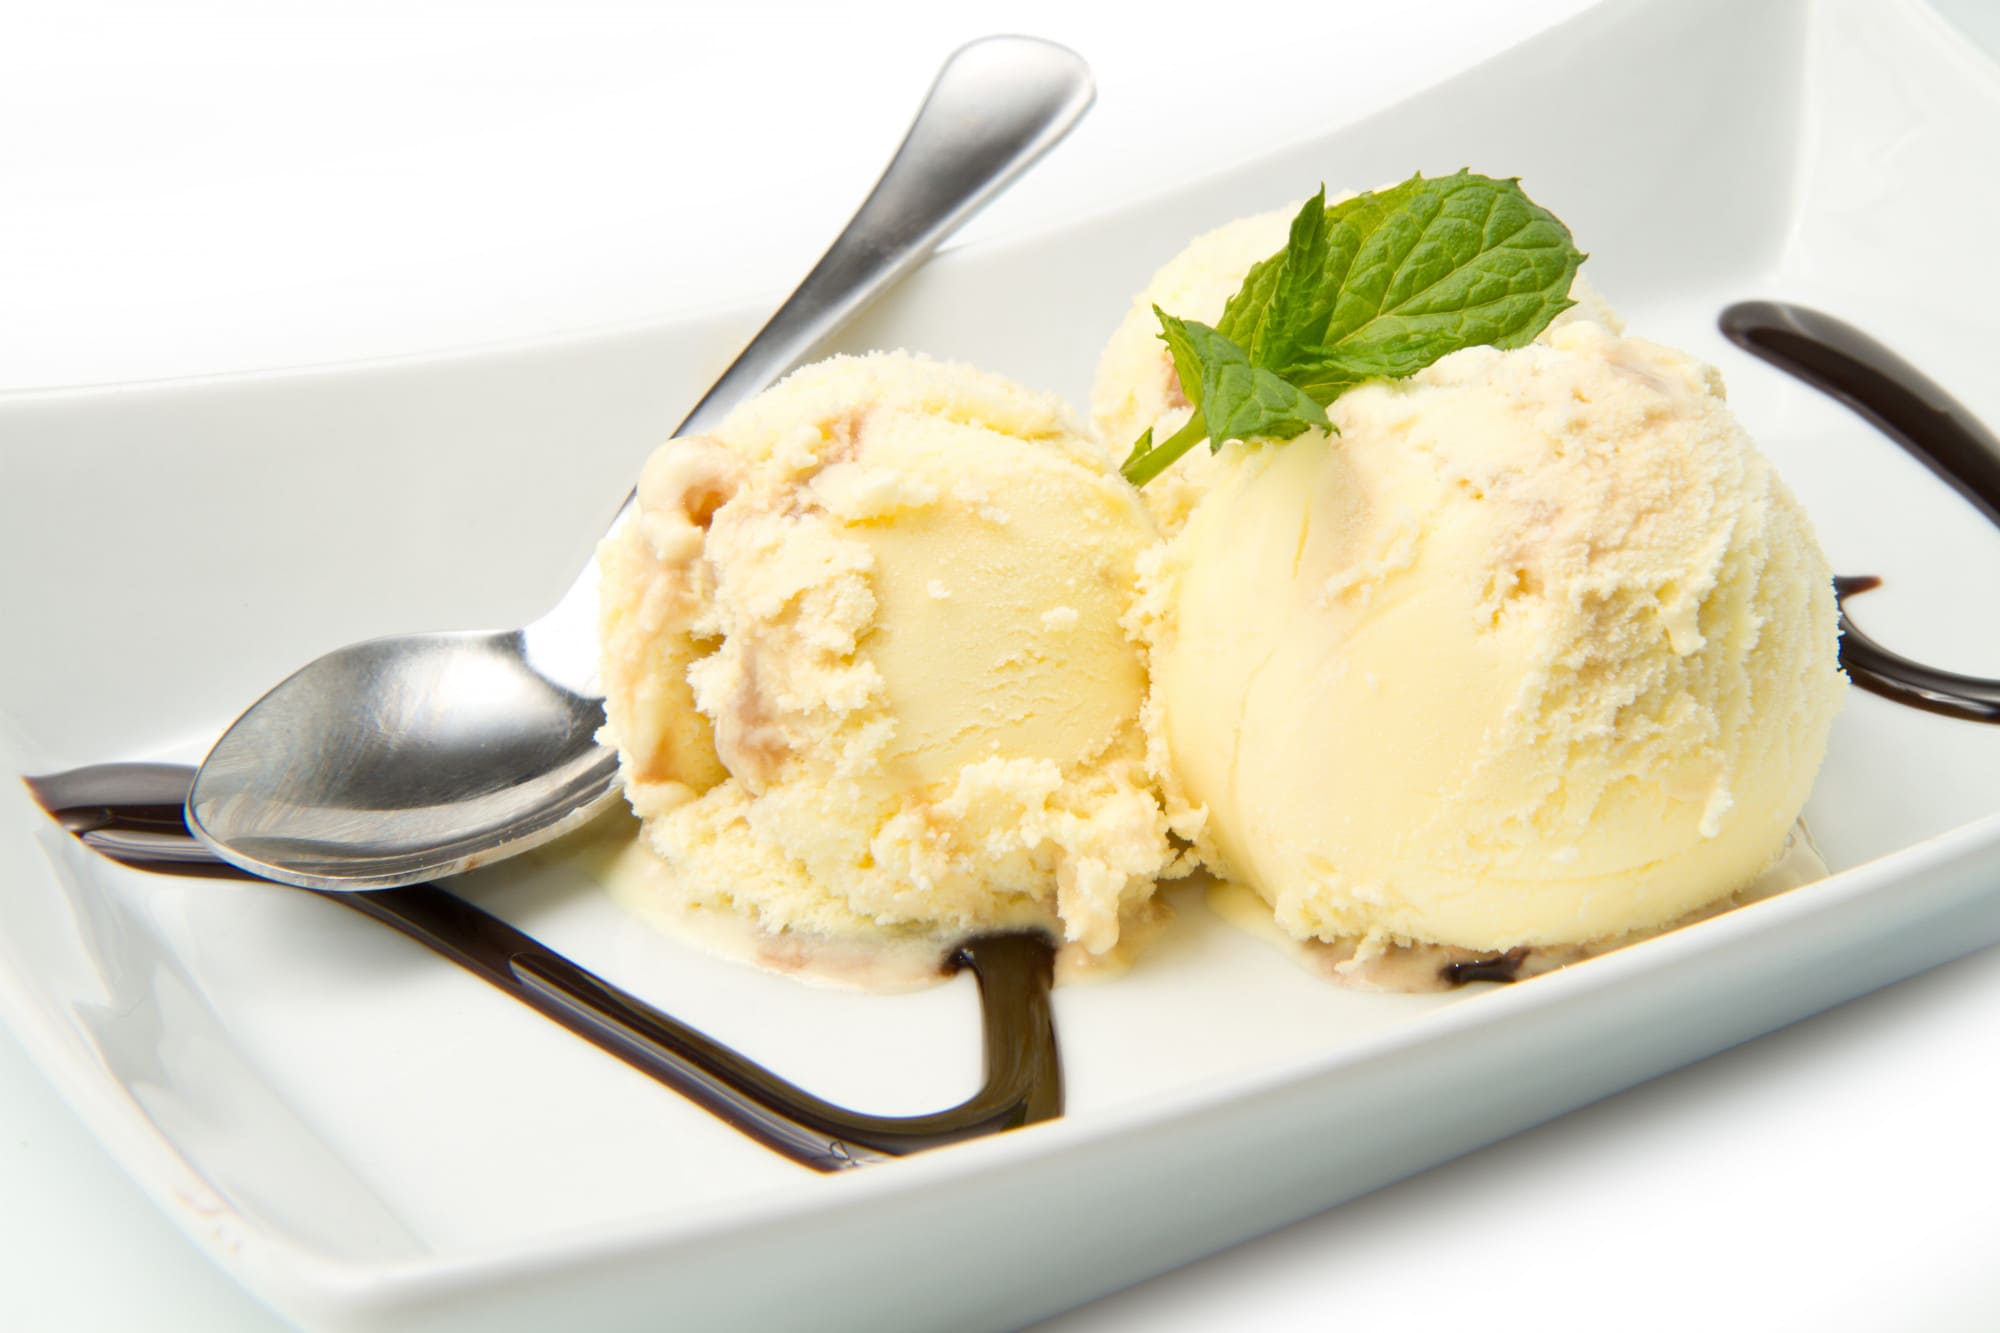 8 Reasons You Should Eat Ice Cream!